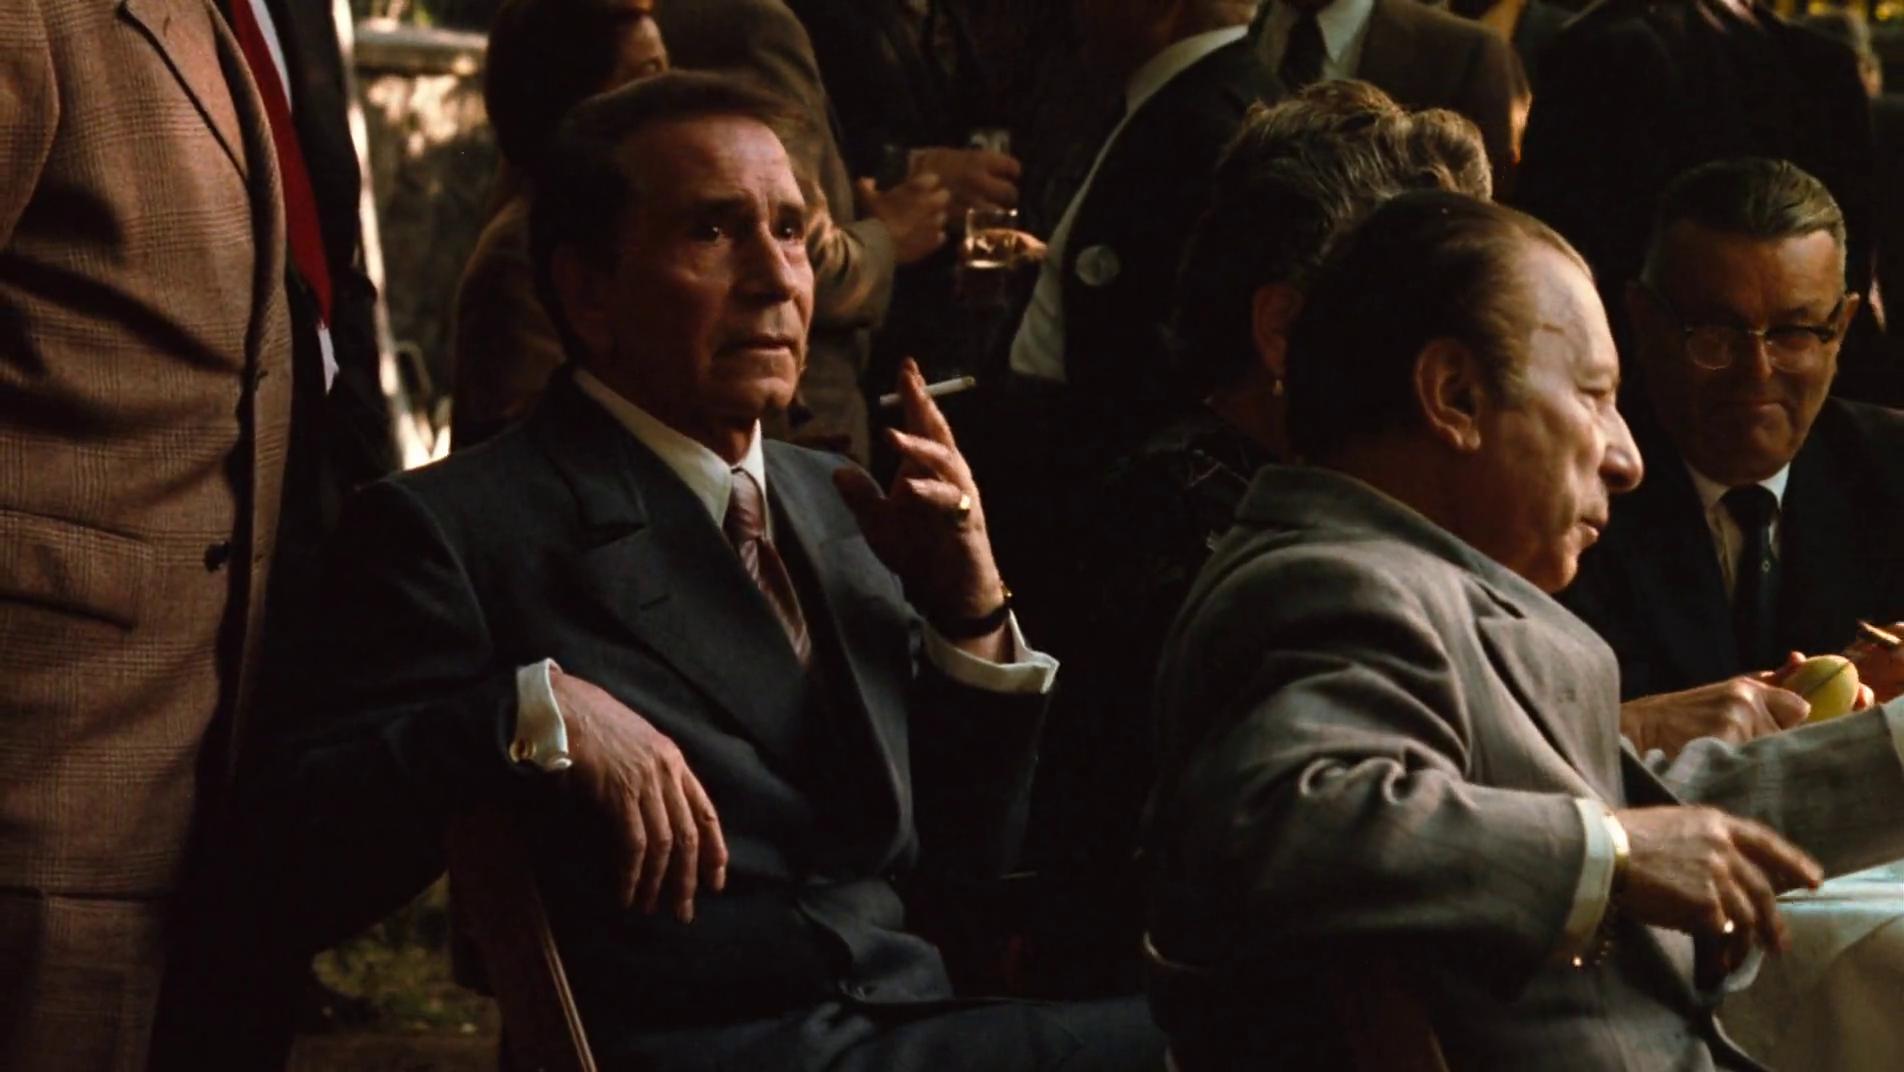 Richard Conte in The Godfather (1972)